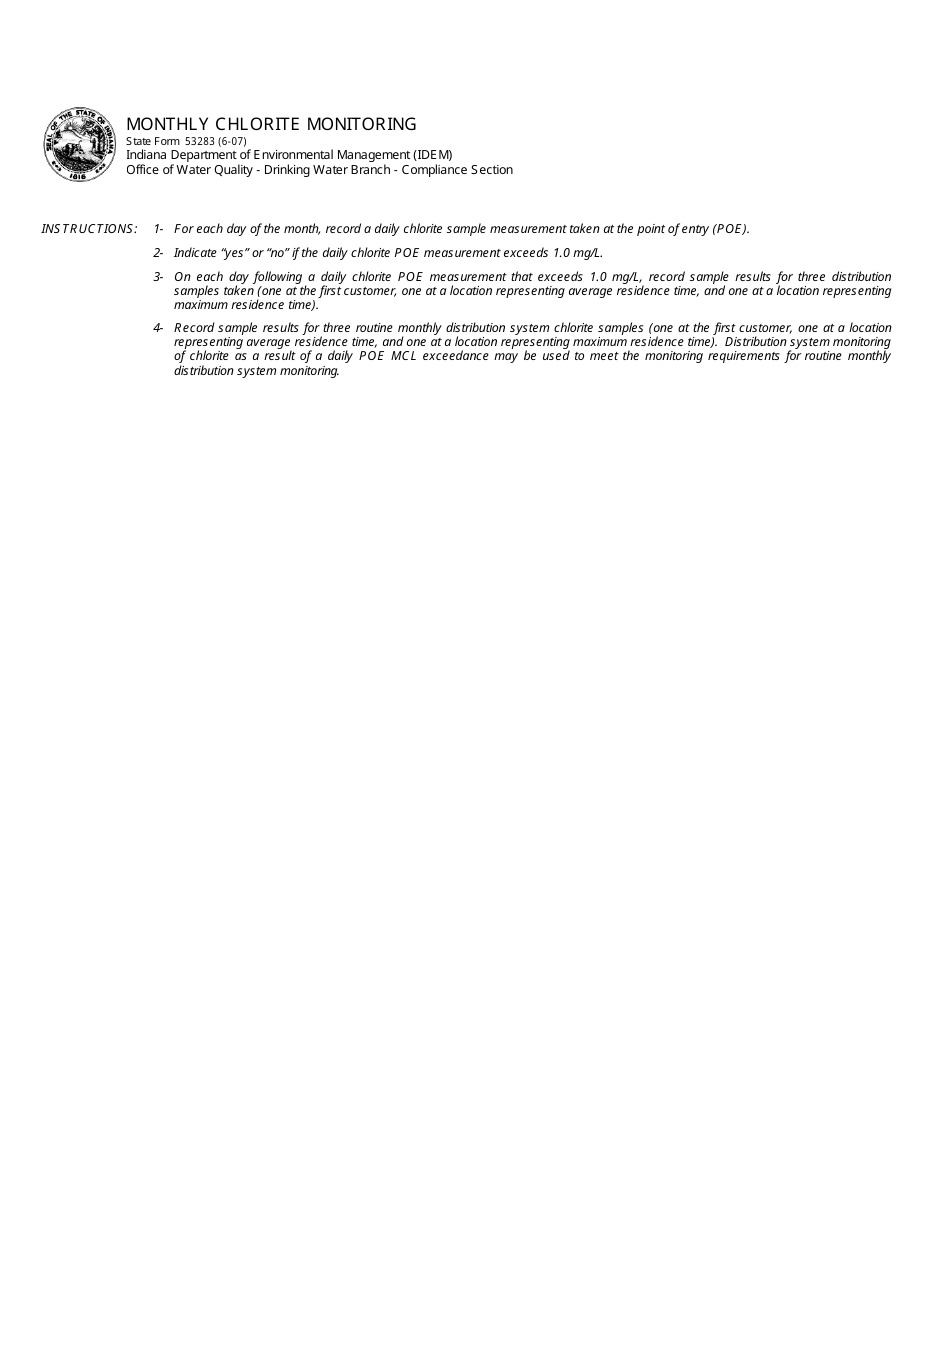 State Form 53283 Monthly Chlorite Monitoring - Indiana, Page 1